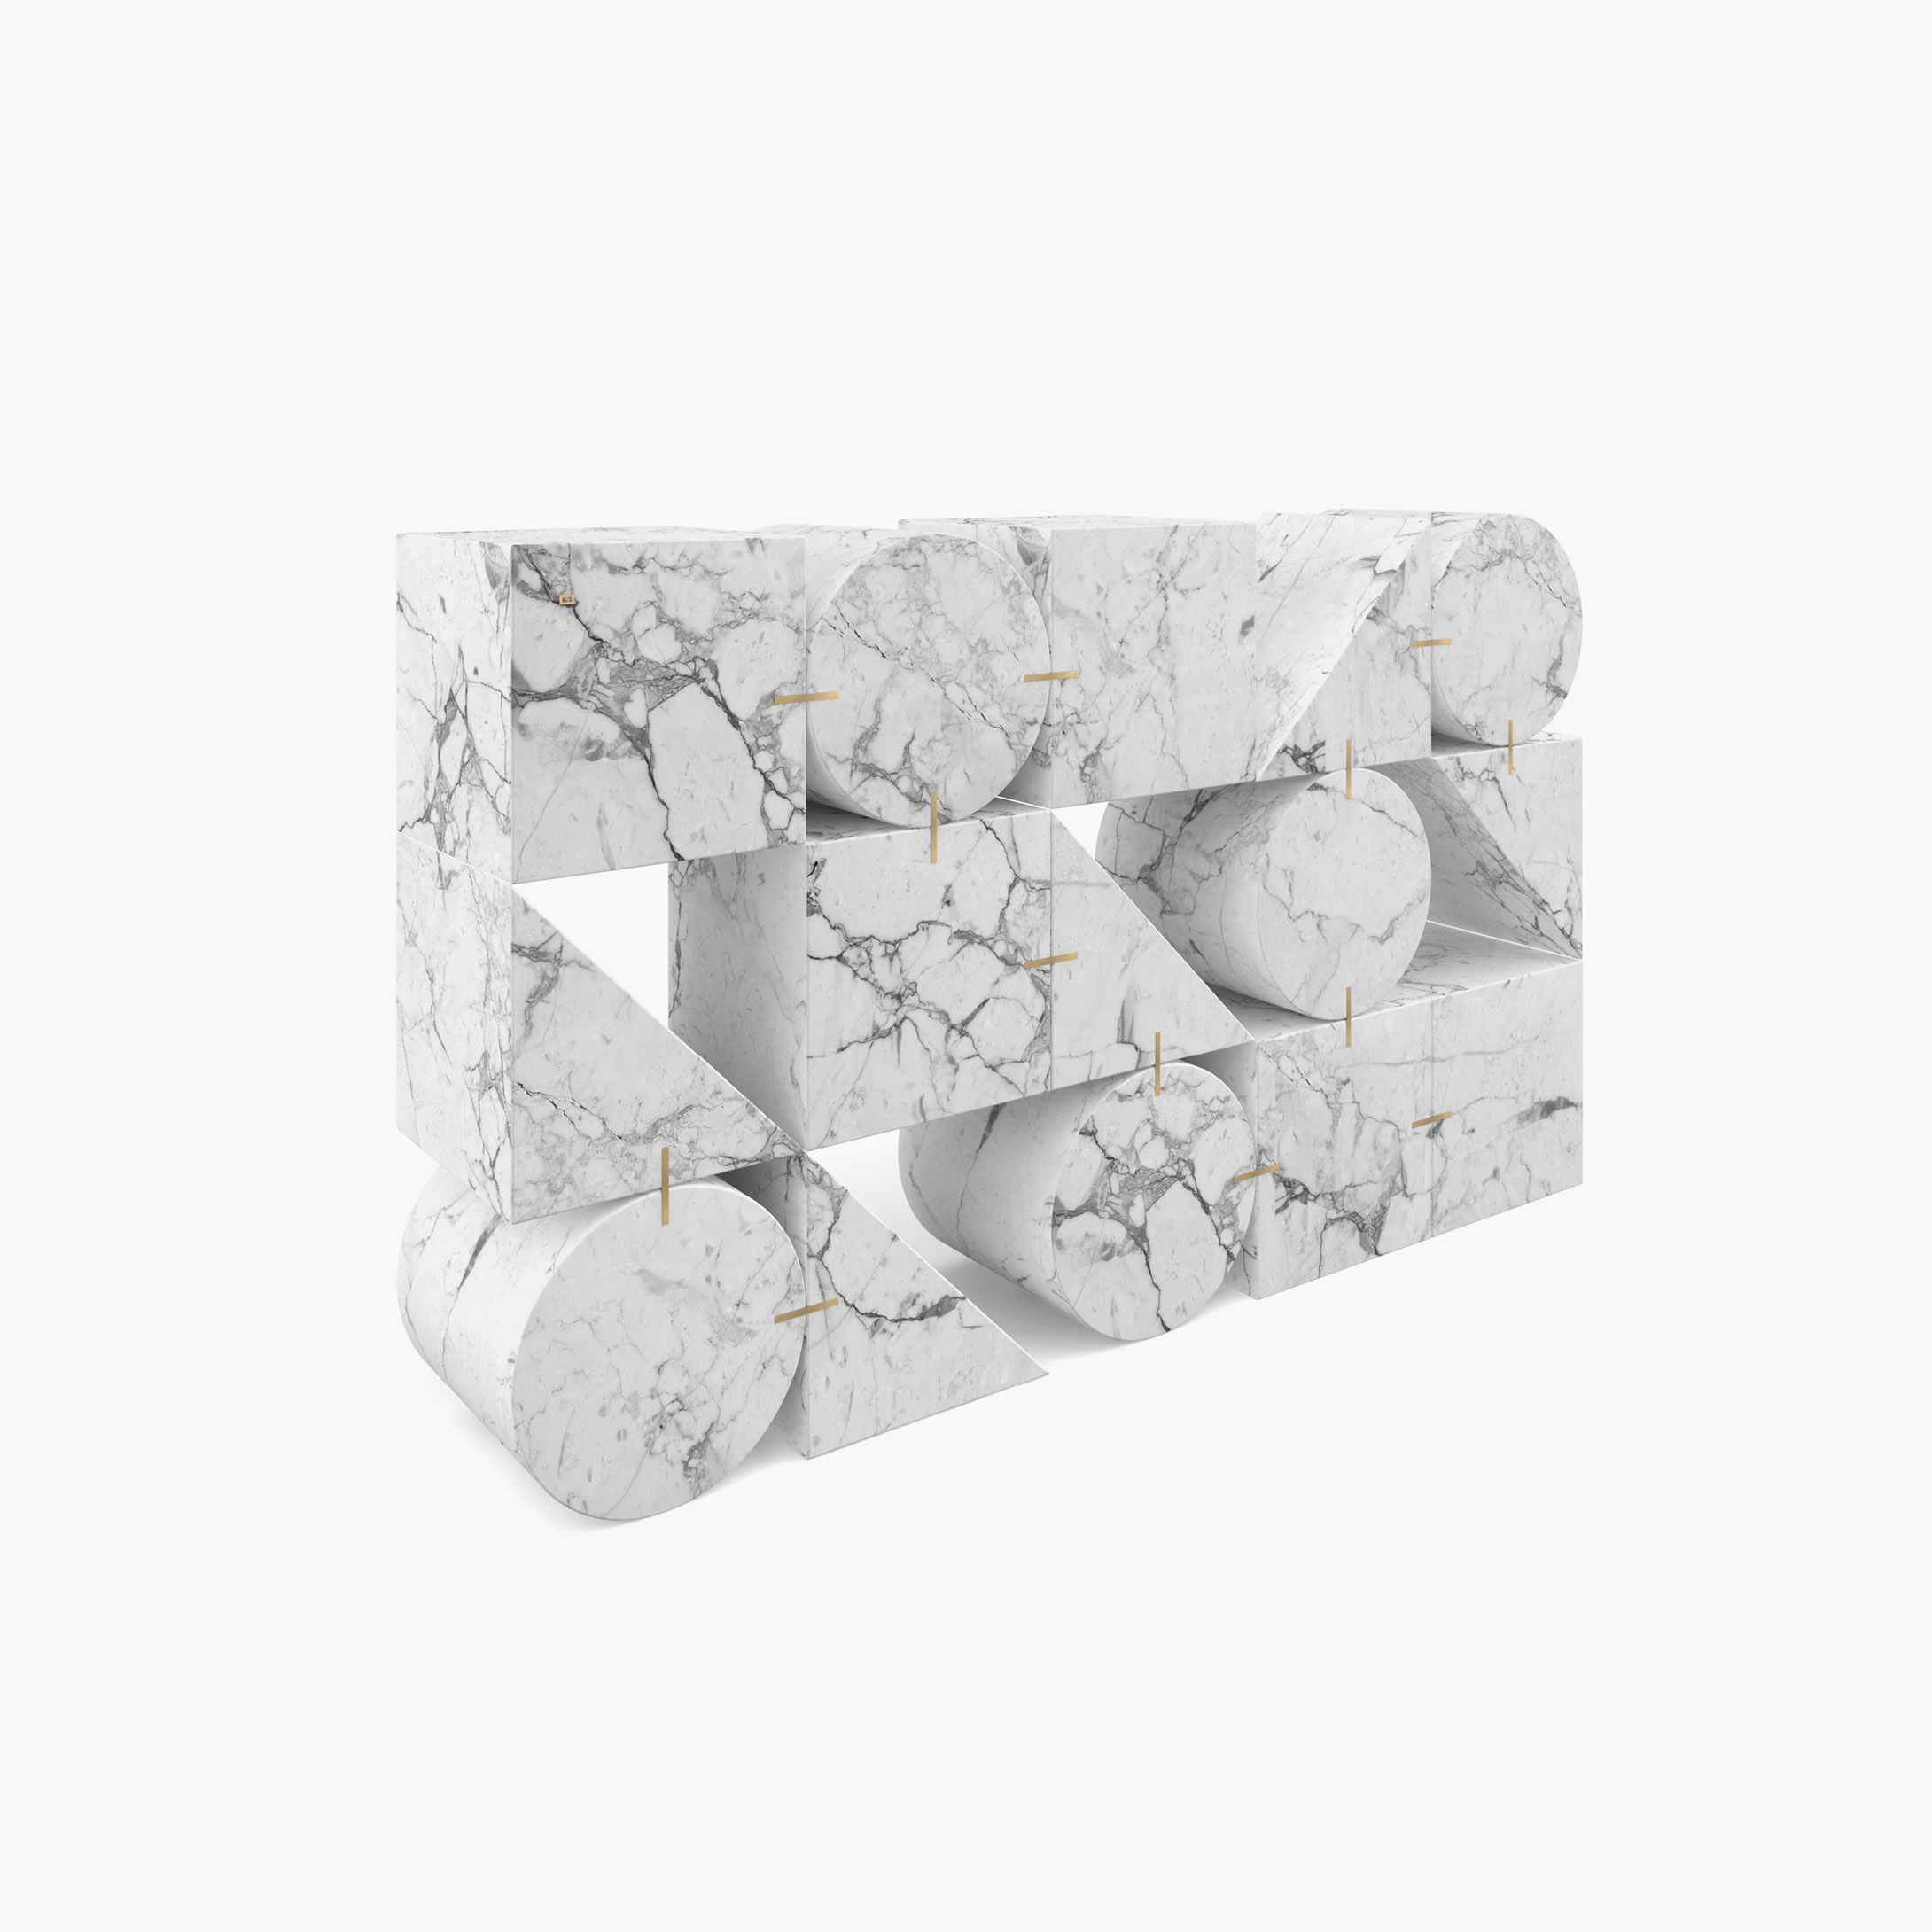 Sideboard high of prisms cylinders and cubes White Arabescato Marble art Living Room art works Sideboards FS 88 2 FELIX SCHWAKE